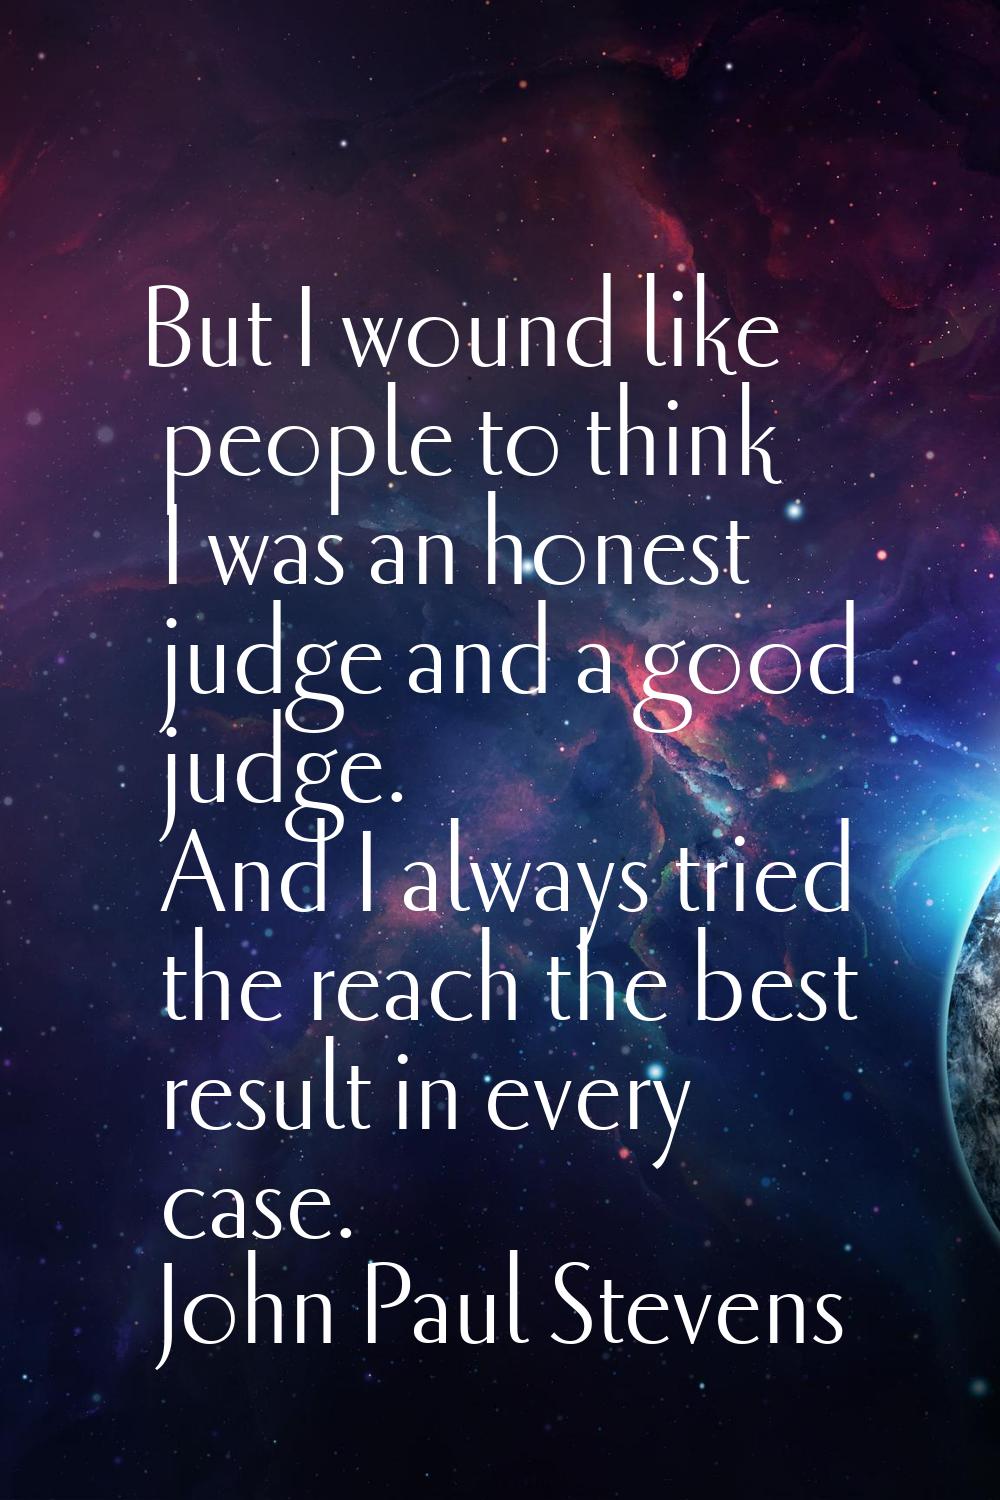 But I wound like people to think I was an honest judge and a good judge. And I always tried the rea